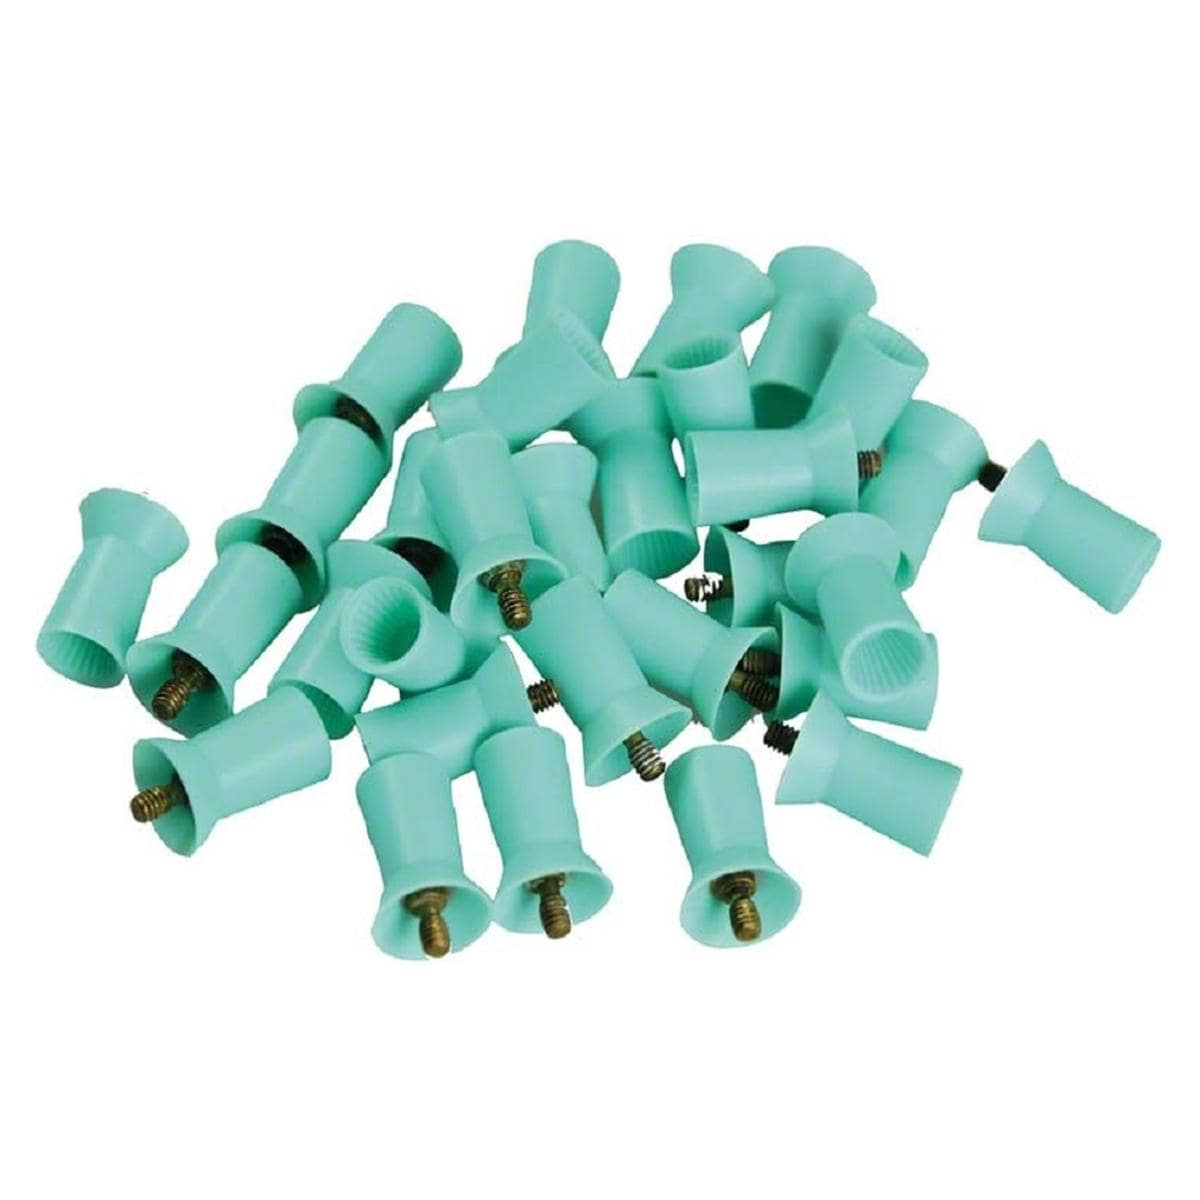 KerrHawe Prophy Cups - 9000/30 Stries, turquoise screw-type souple, 30 pcs